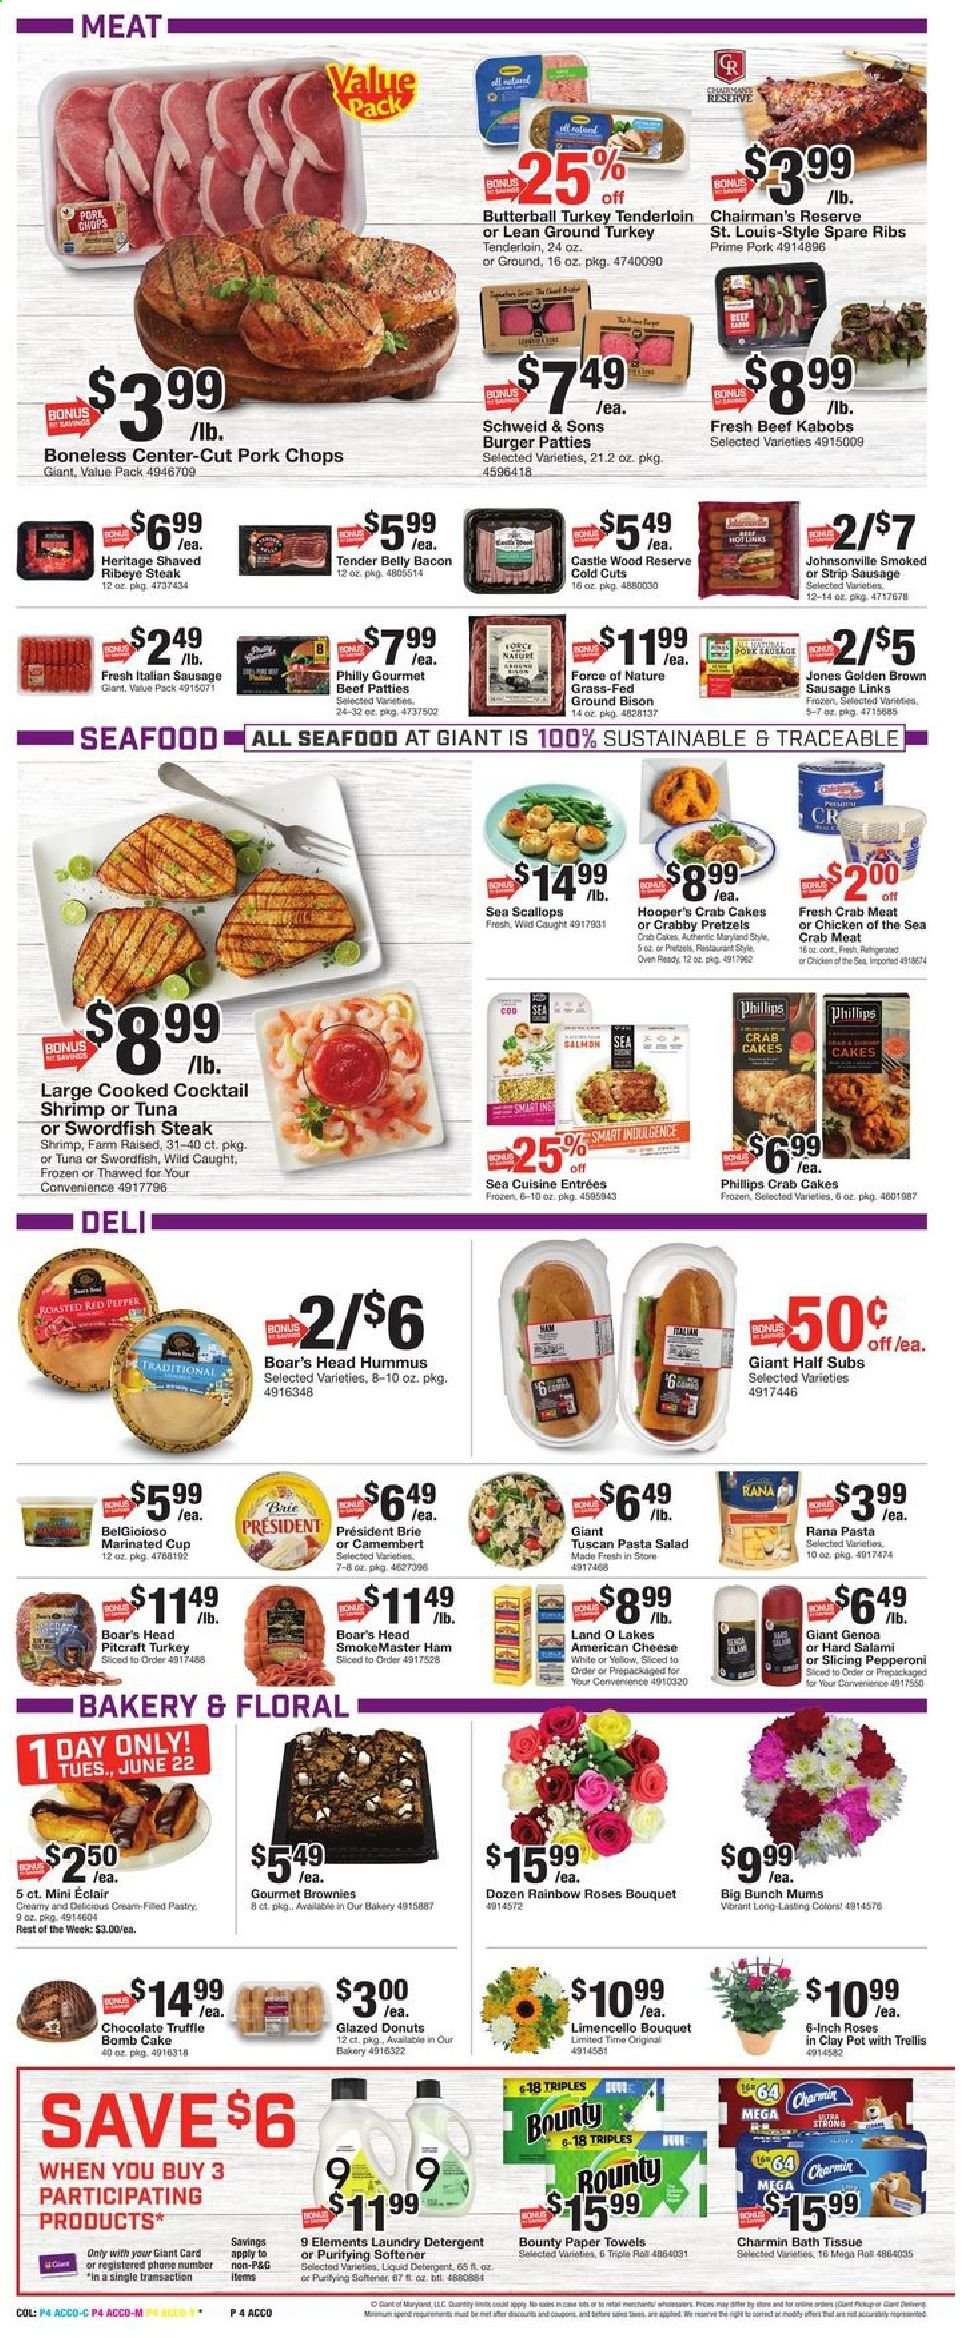 thumbnail - Giant Food Flyer - 06/18/2021 - 06/24/2021 - Sales products - pretzels, brownies, donut, salad, crab meat, salmon, scallops, swordfish, tuna, seafood, shrimps, crab cake, hamburger, pasta, Giovanni Rana, Rana, bacon, Butterball, salami, ham, Johnsonville, sausage, pepperoni, italian sausage, hummus, pasta salad, american cheese, camembert, cheese, brie, Président, chocolate, Bounty, Chicken of the Sea, Castle, ground turkey, turkey tenderloin, beef meat, beef steak, steak, ribeye steak, bison meat, burger patties, pork chops, pork meat, pork spare ribs, bath tissue, kitchen towels, paper towels, Charmin, detergent, fabric softener, laundry detergent, pot, cup, bouquet, rose. Page 4.